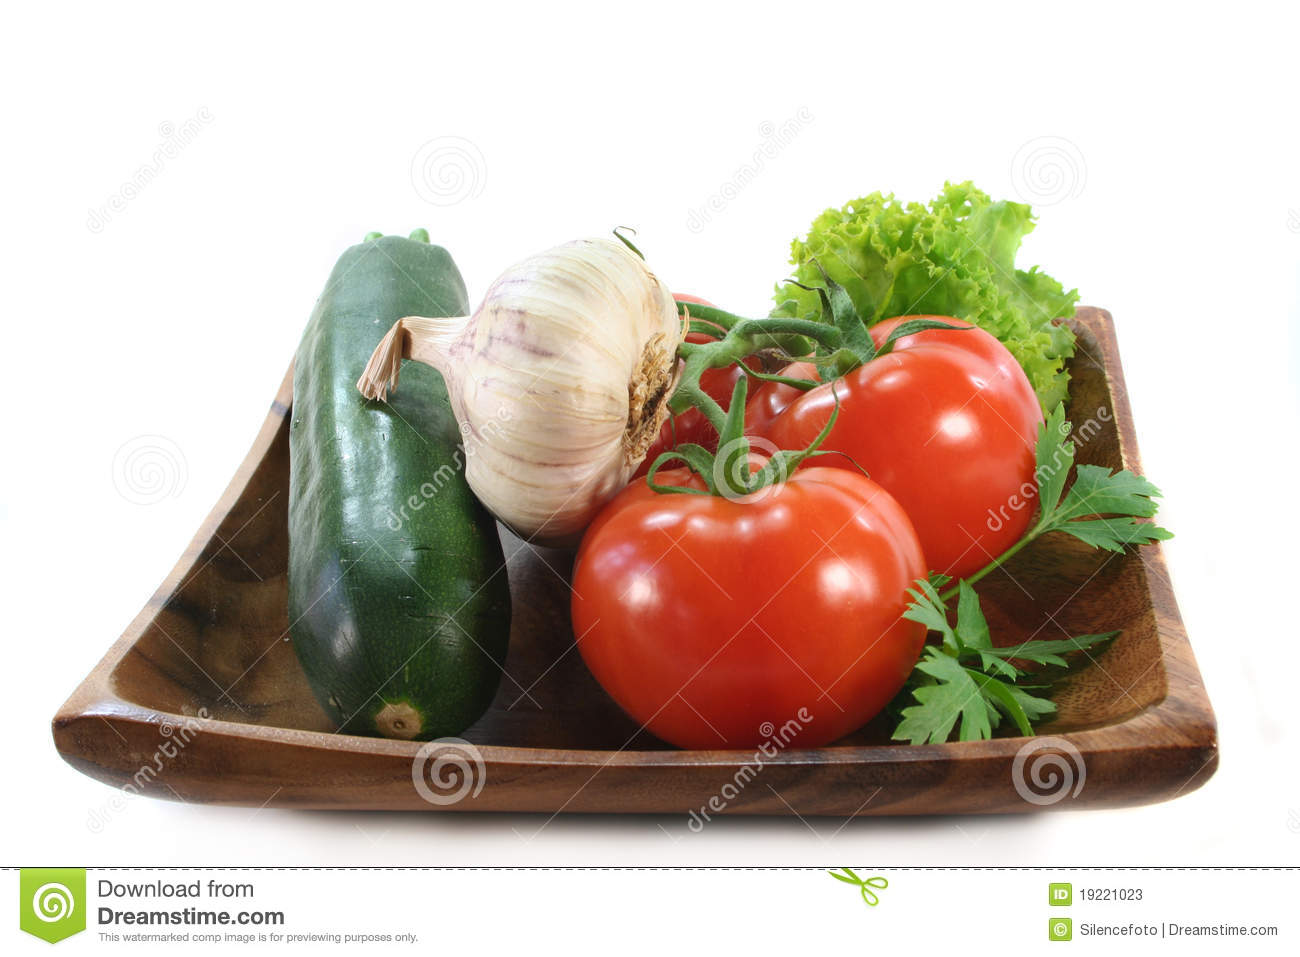 Wooden Platter With Assorted Vegetables